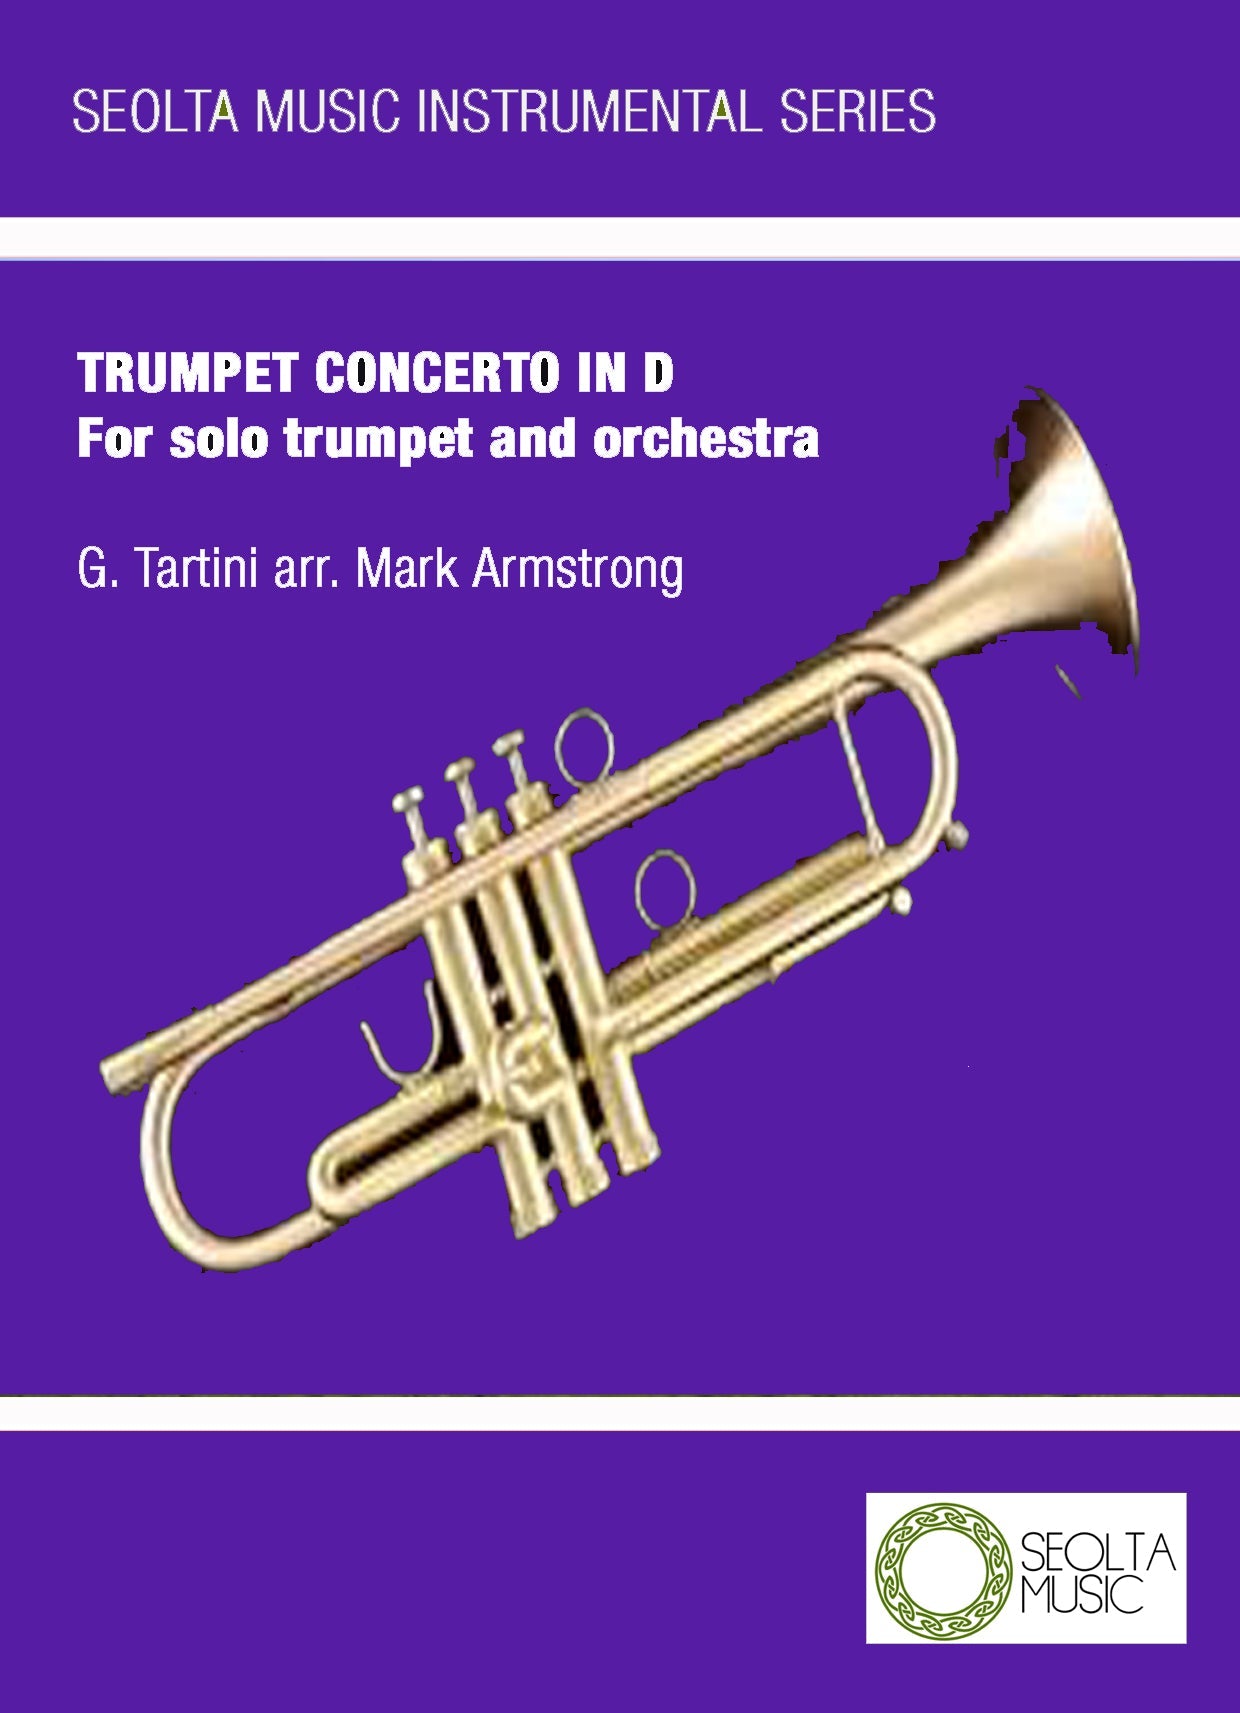 trumpet-concerto-in-d-g-tartini-arranged-for-trumpet-and-small-orchestra